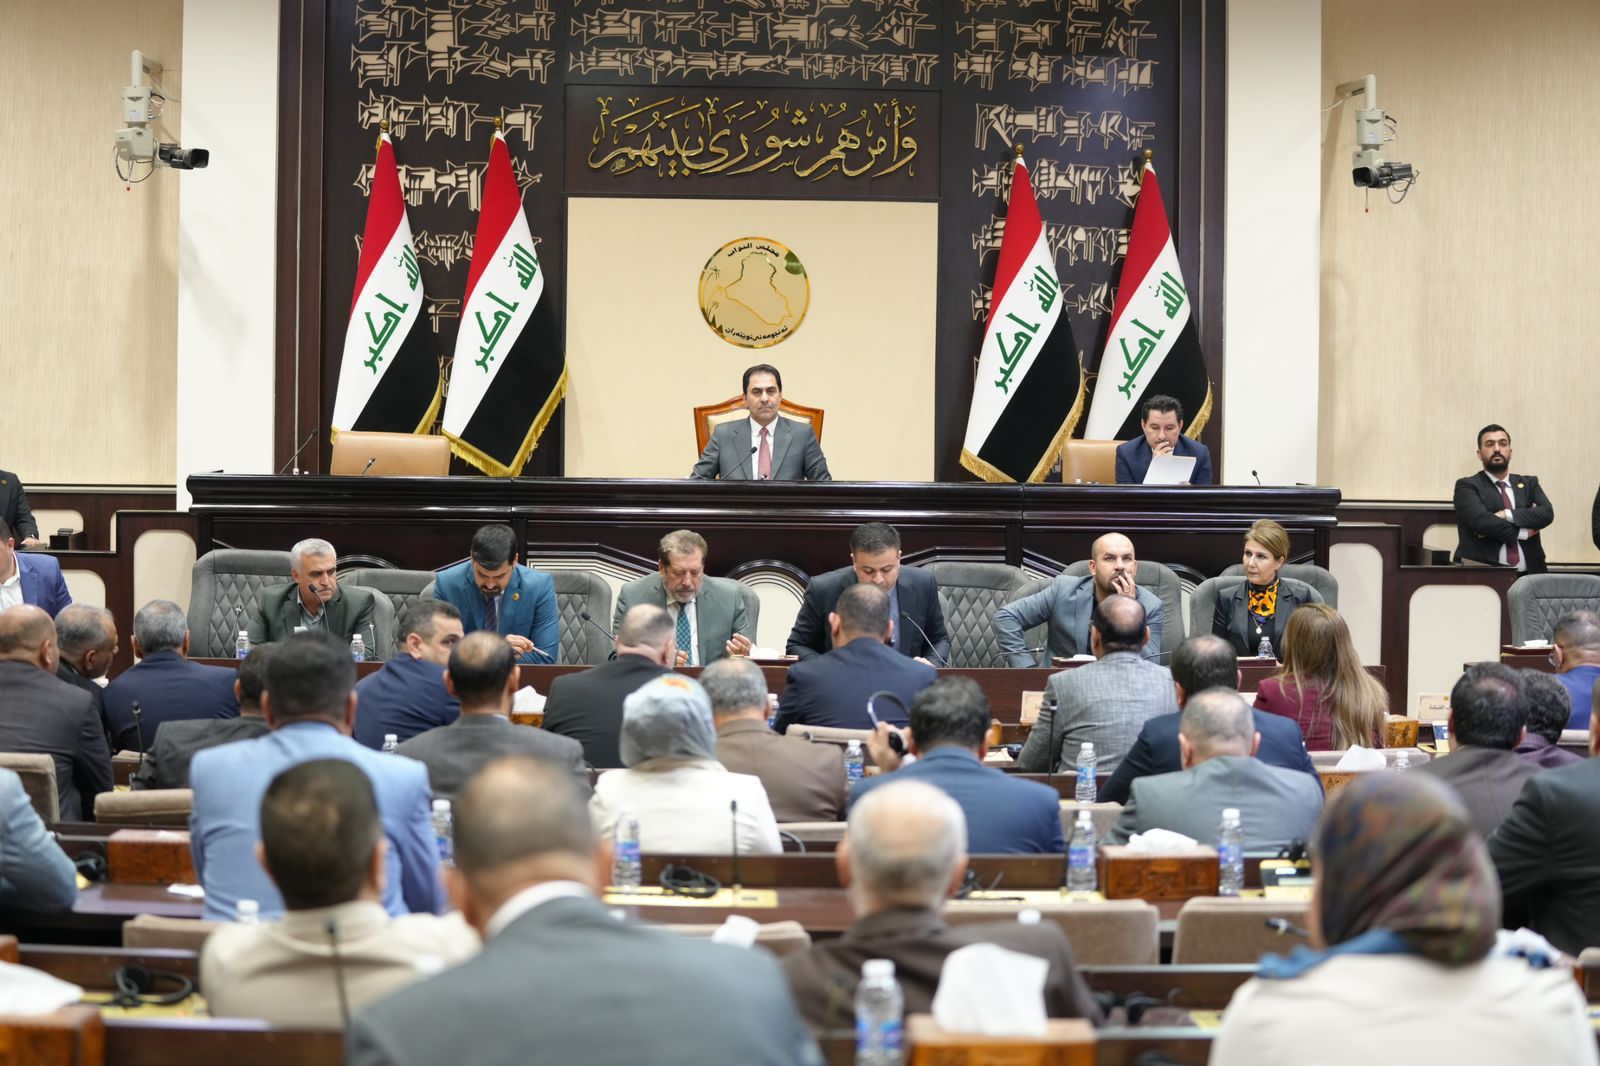 Coordination framework - We are waiting for the agreement of the Sunni blocs to choose the Speaker of Parliament not the decision of the Federal Court